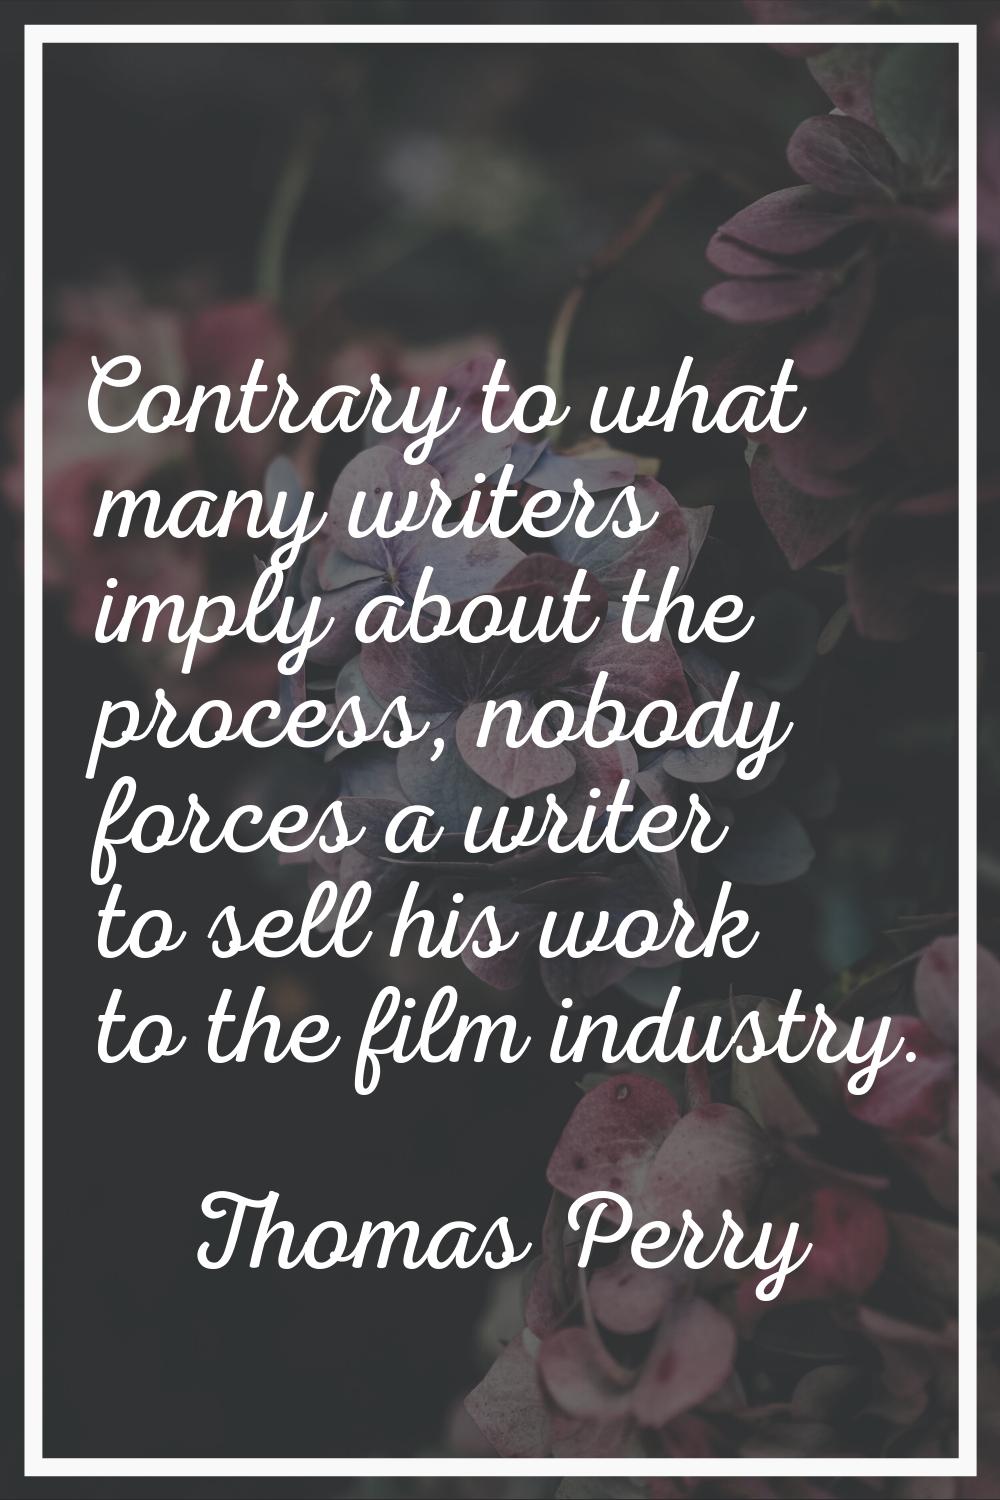 Contrary to what many writers imply about the process, nobody forces a writer to sell his work to t